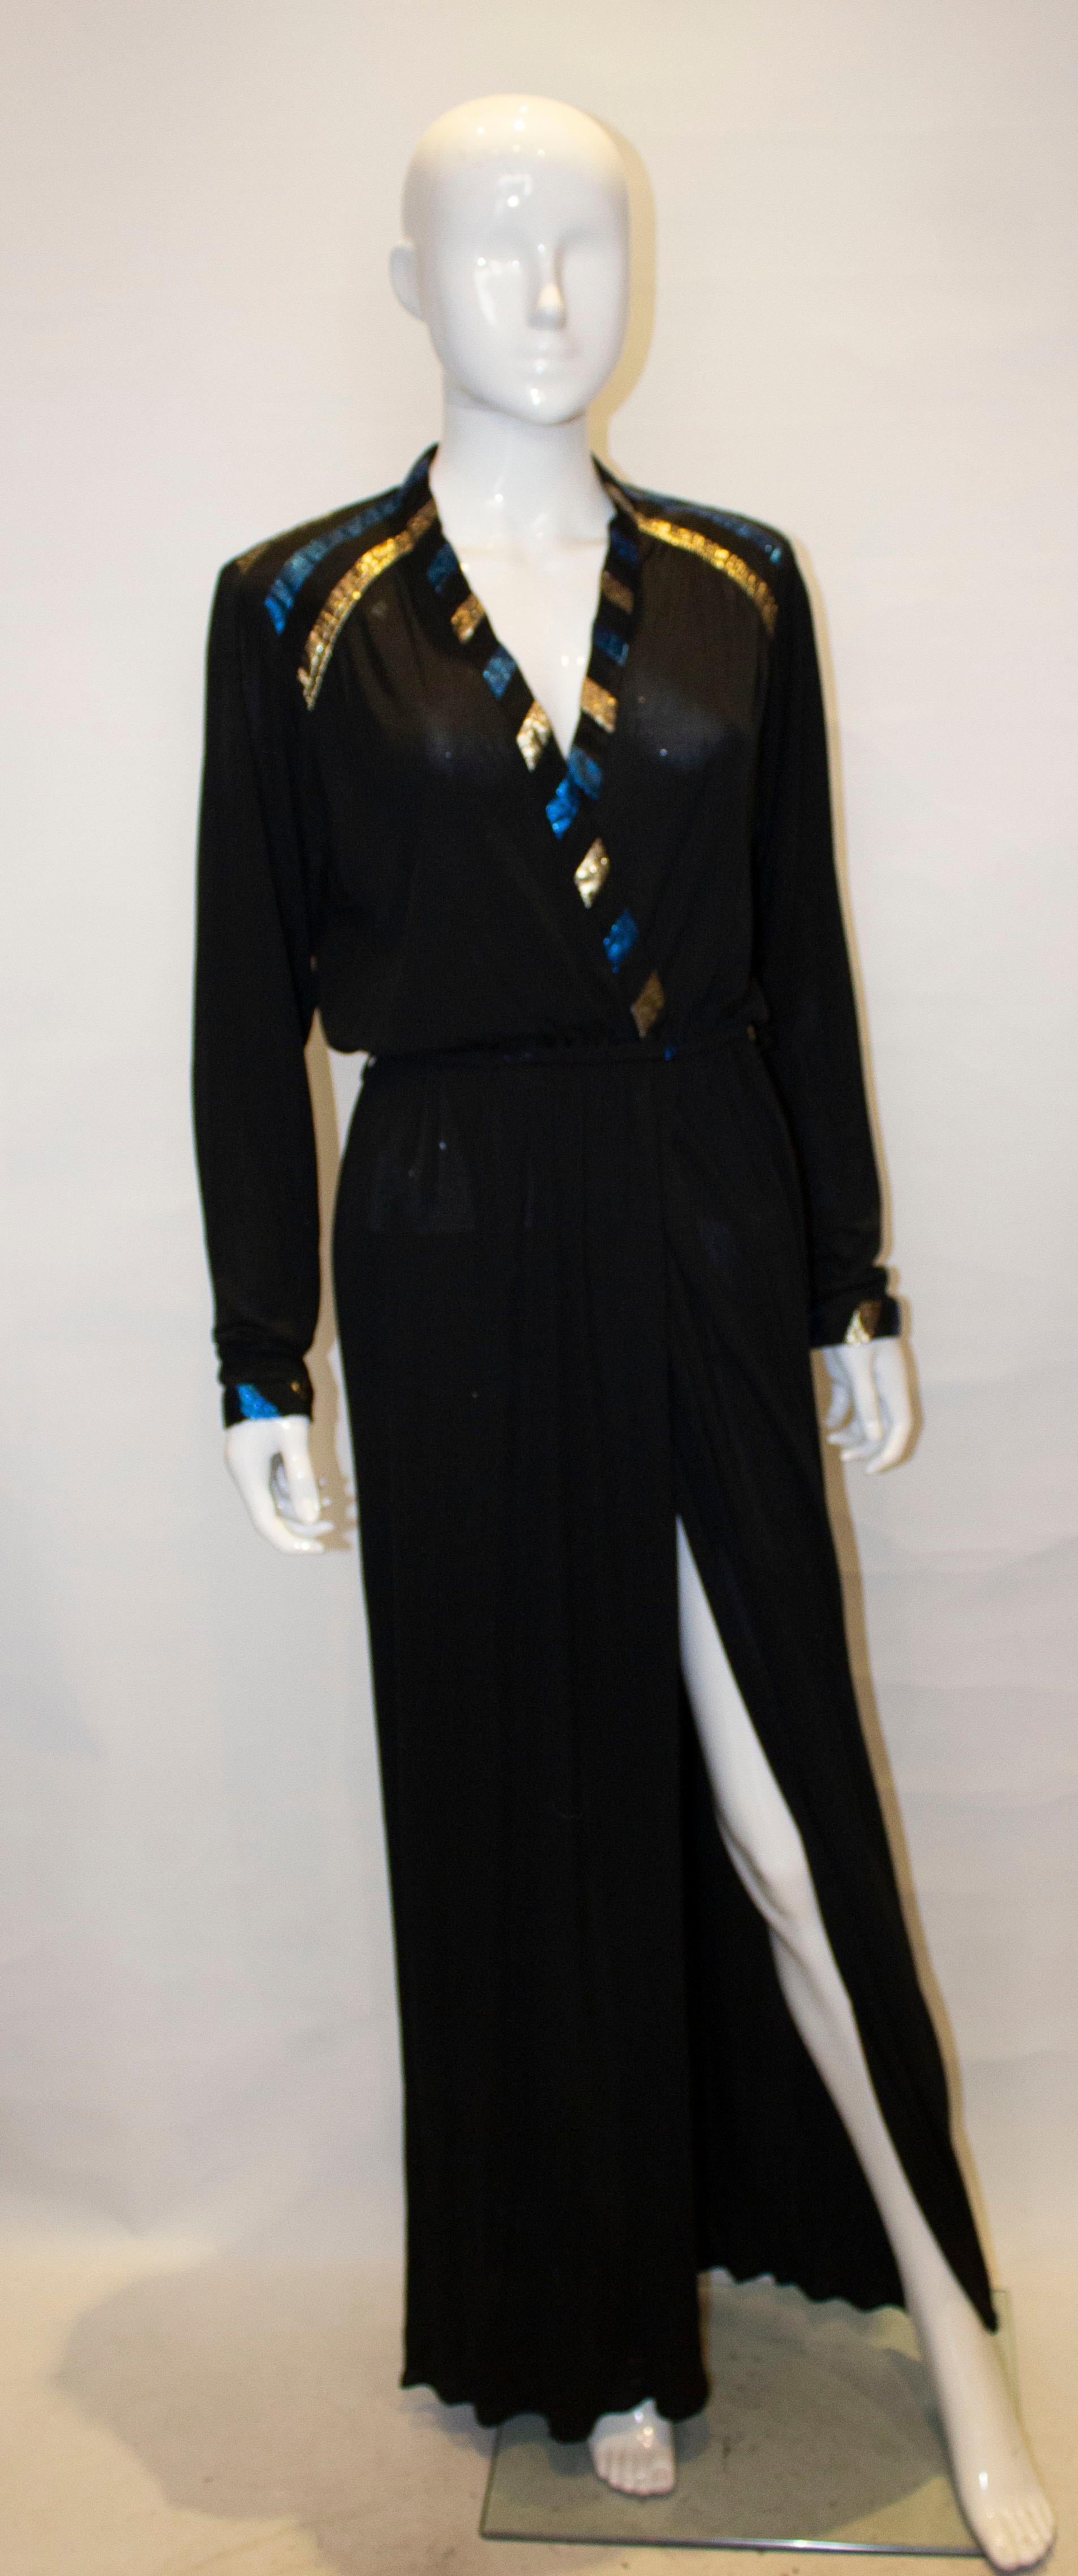 A chic and easy to wear evening dress by Roland Klein. The dress has a v neckline and wrap over front with blue and gold detail on the neck and cuffs. It has an elastic waist and slit at the front. 
Measurements : Bust 39'' waist 26'' -30'' length